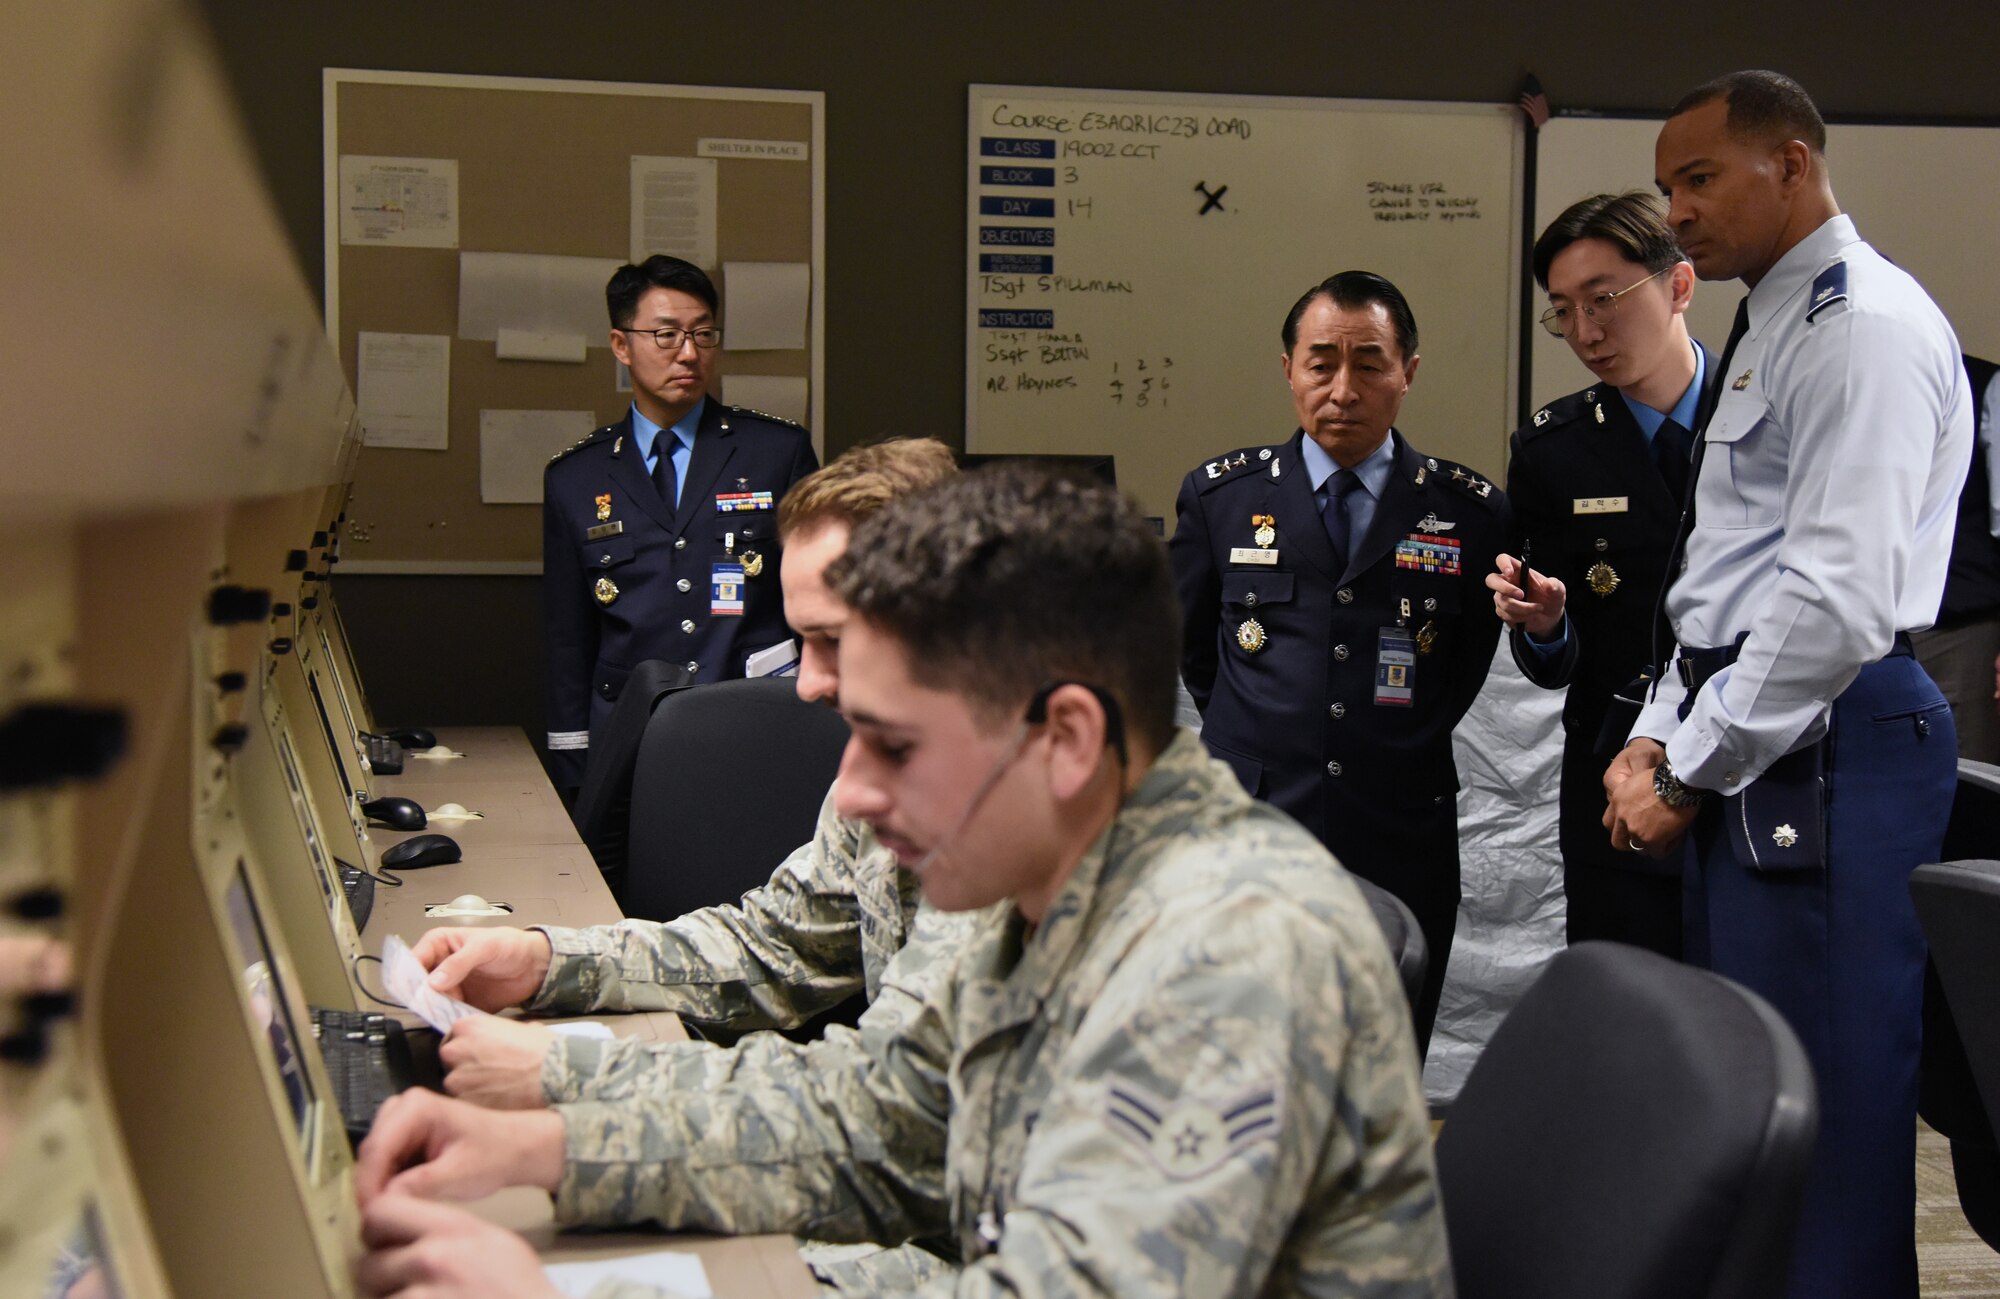 U.S. Air Force Lt. Col. Billy Wilson, 334th Training Squadron commander, shows Republic of Korea Air Force Maj. Gen. Geunyoung Choi, ROKAF Air Education and Training Command commander, a classroom in his squadron during their visit to Keesler Air Force Base, Mississippi, March 22, 2019. Choi visited Keesler to help better develop ROKAF technical education through visiting U.S. Air Force future technology education sites.  (U.S. Air Force photo by Kemberly Groue)